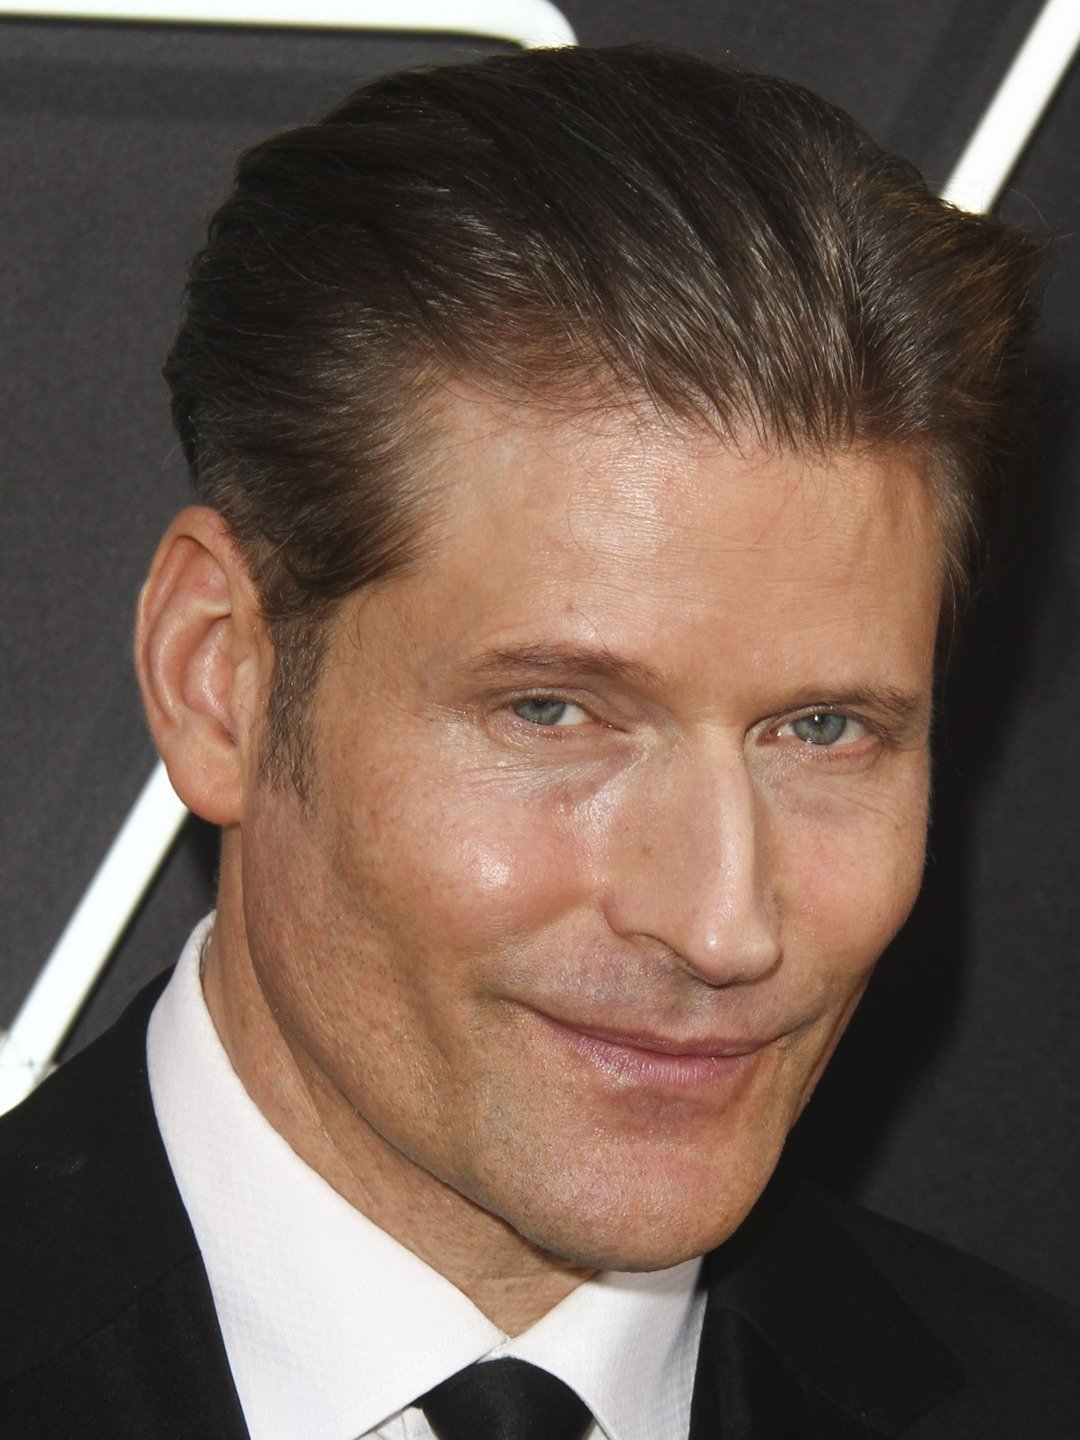 How tall is Crispin Glover?